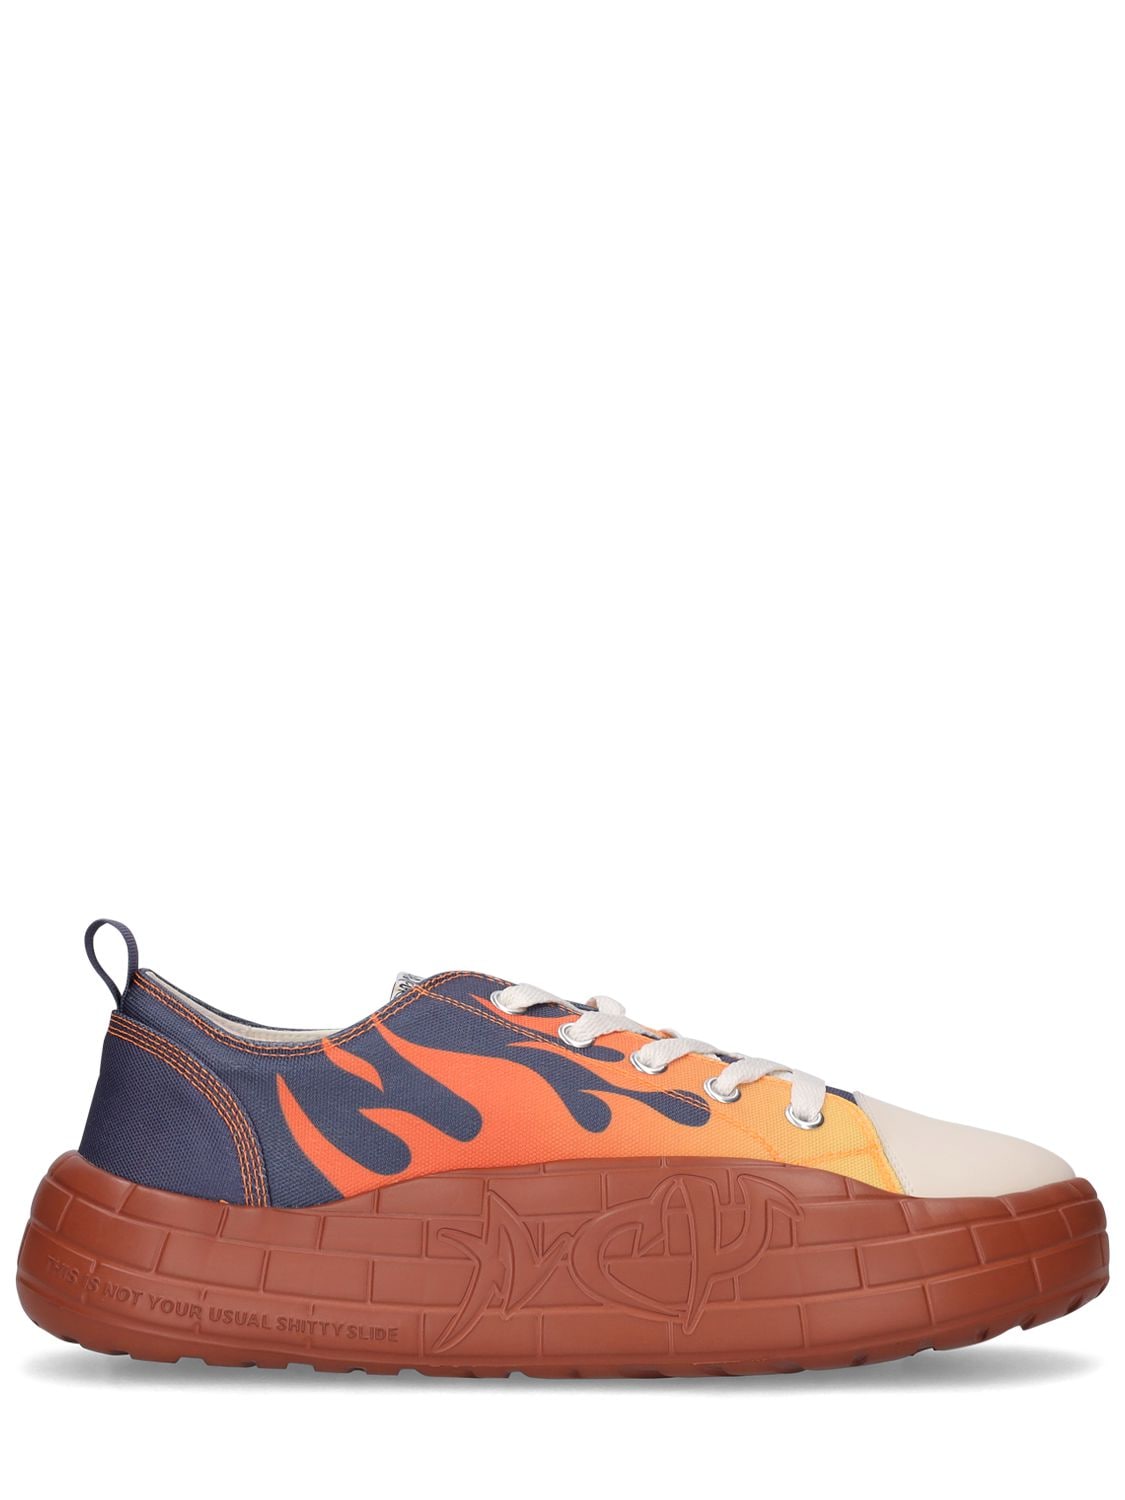 Acupuncture Nyu Vulc Flame Canvas Sneakers In Blue,orange